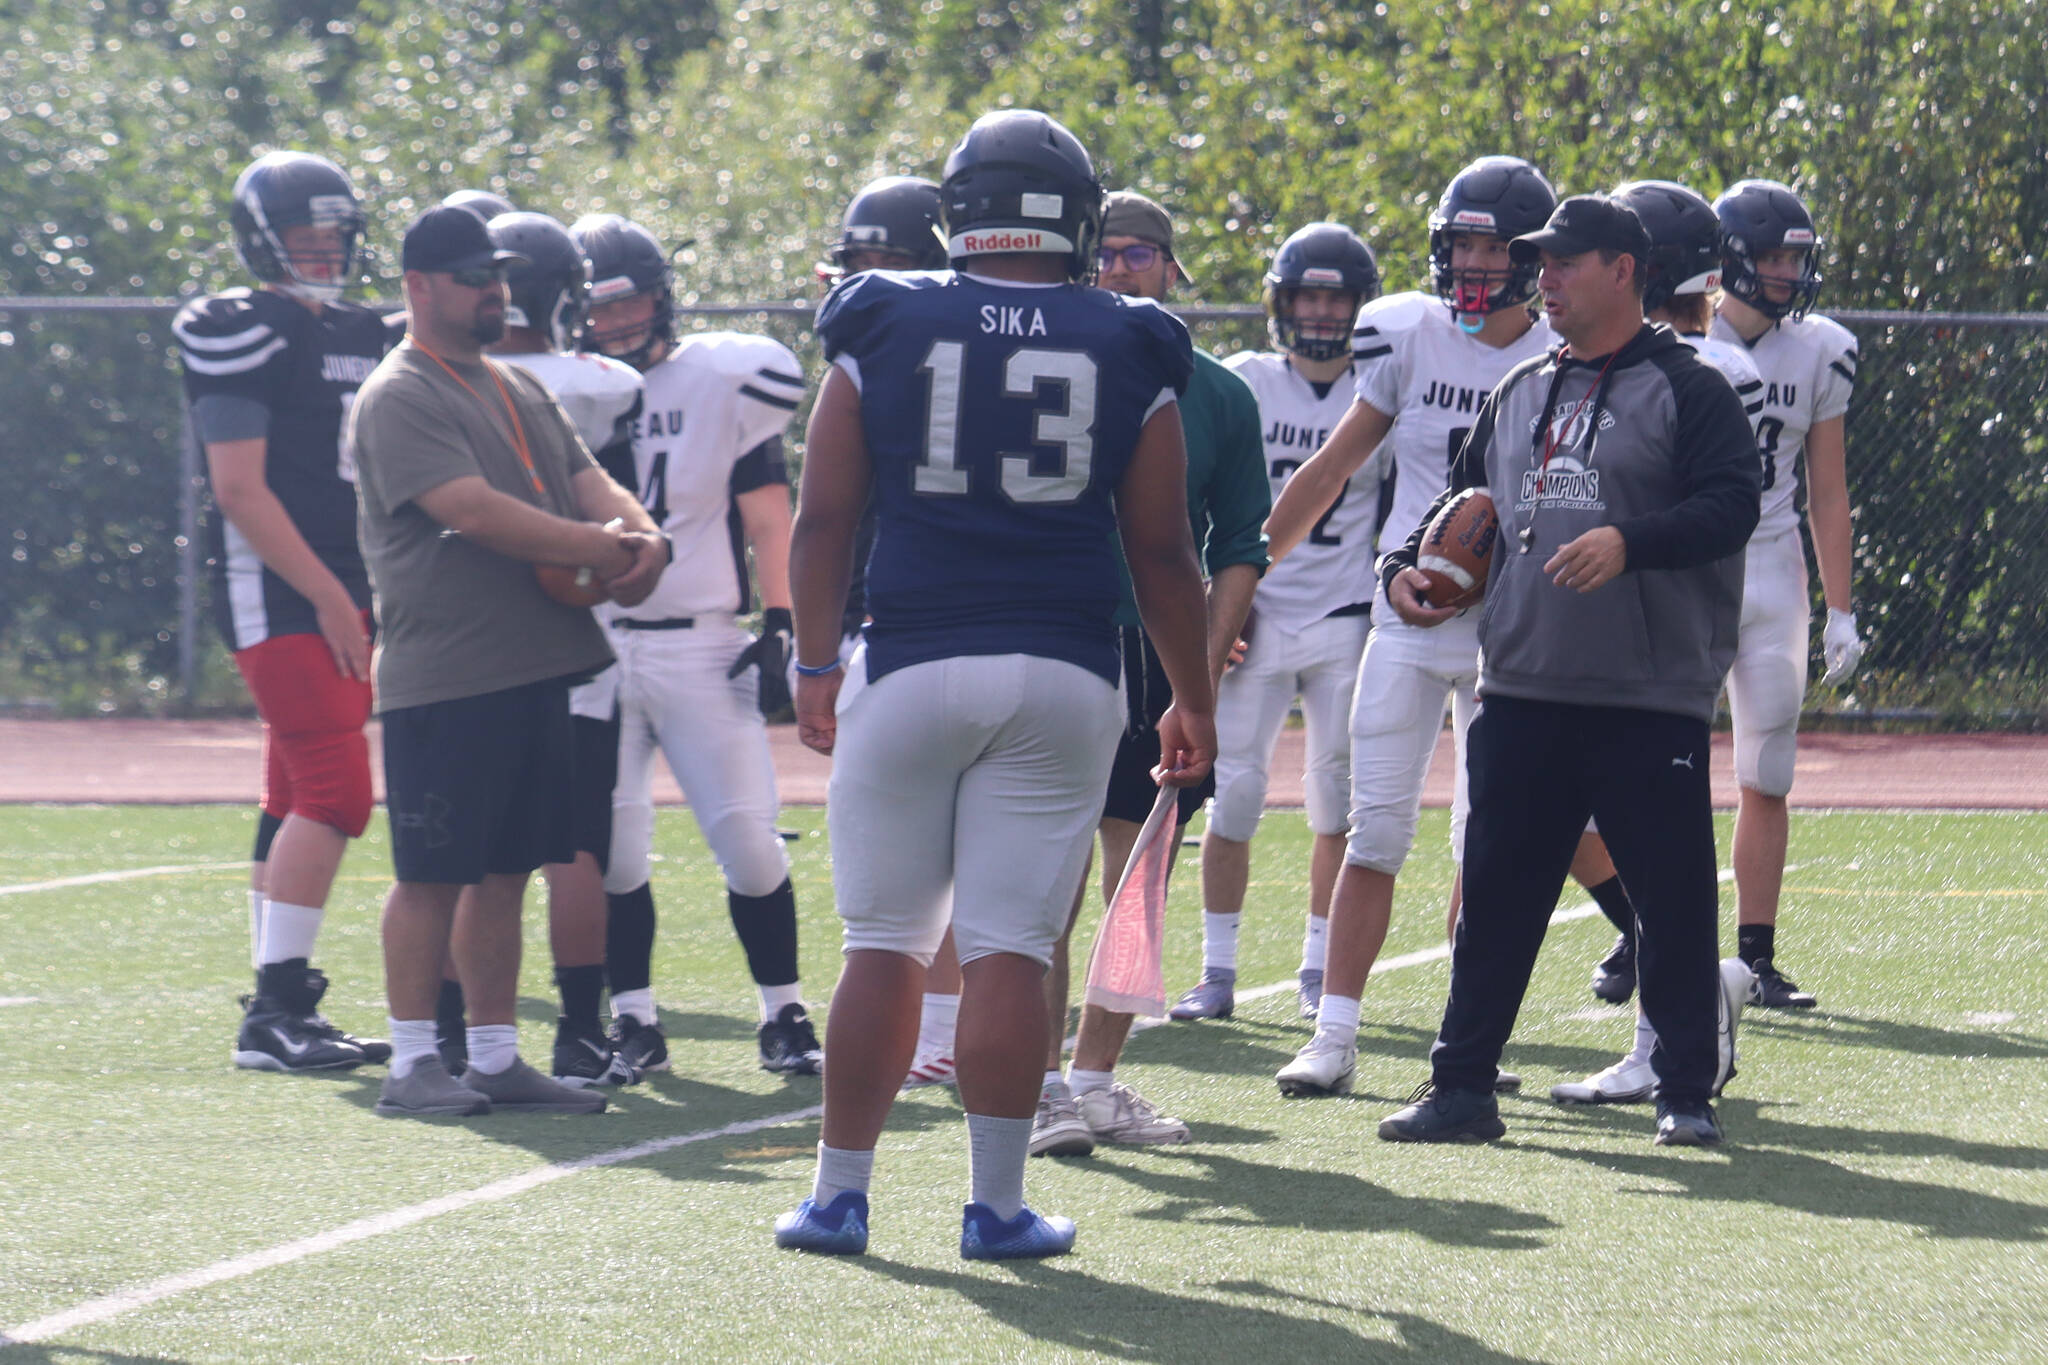 Juneau senior Sam Sika is seen in this photo joining the huddle for coach Sjoroos’ pep talk during practice. Sika and the rest of Huskies defense came up big on Saturday’s season opener against the Dimond Lynx in Anchorage. (Jonson Kuhn / Juneau Empire)